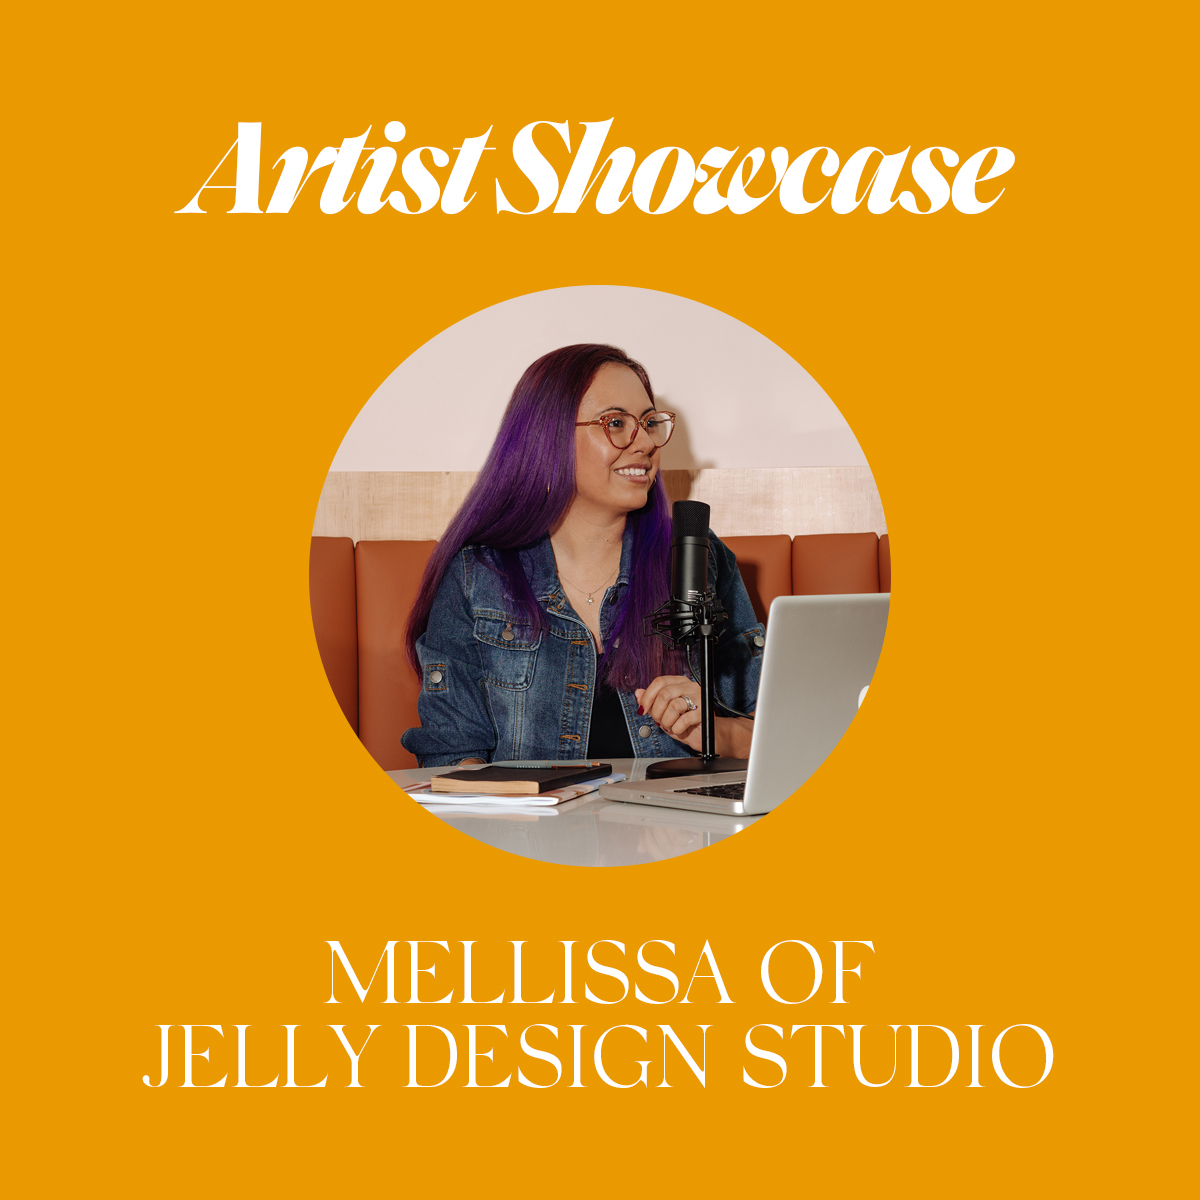 Article image with yellow background featuring the text Artist Showcase Melissa of Jelly Design Studio with a photo of Melissa in a circle sitting at a table with a laptop and black microphone